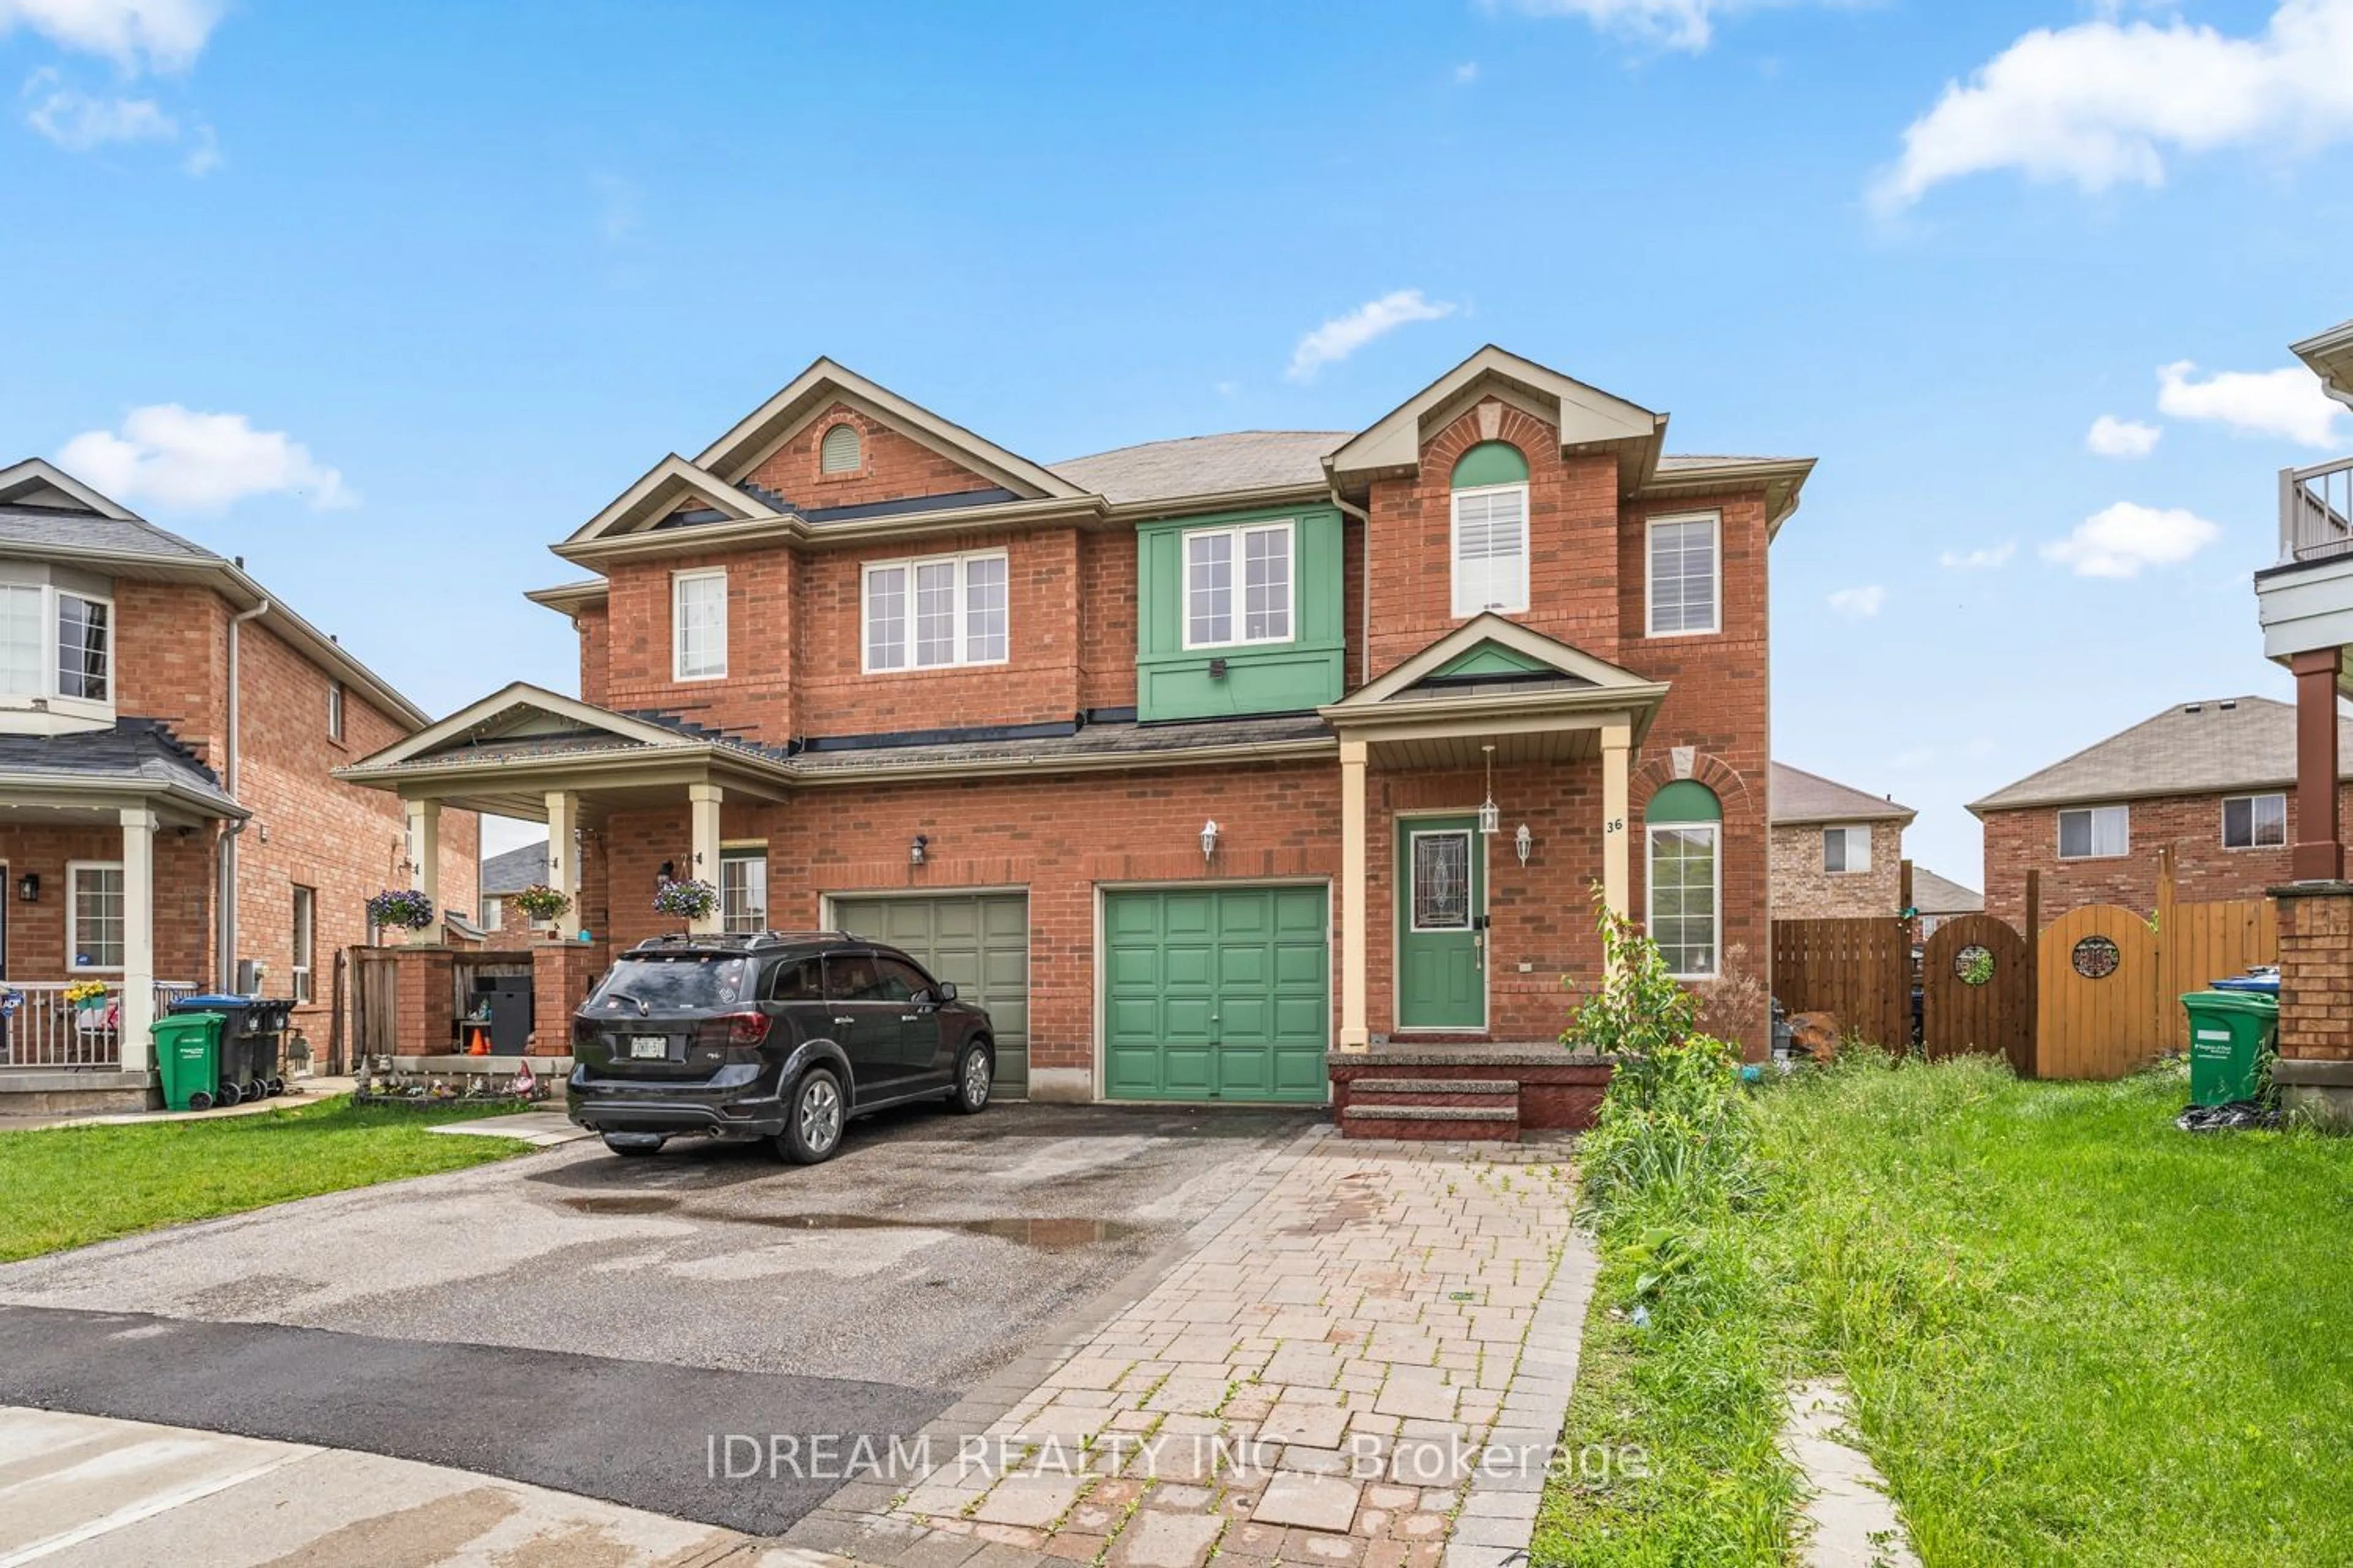 Home with brick exterior material for 36 Flurry Circ, Brampton Ontario L6X 0S8